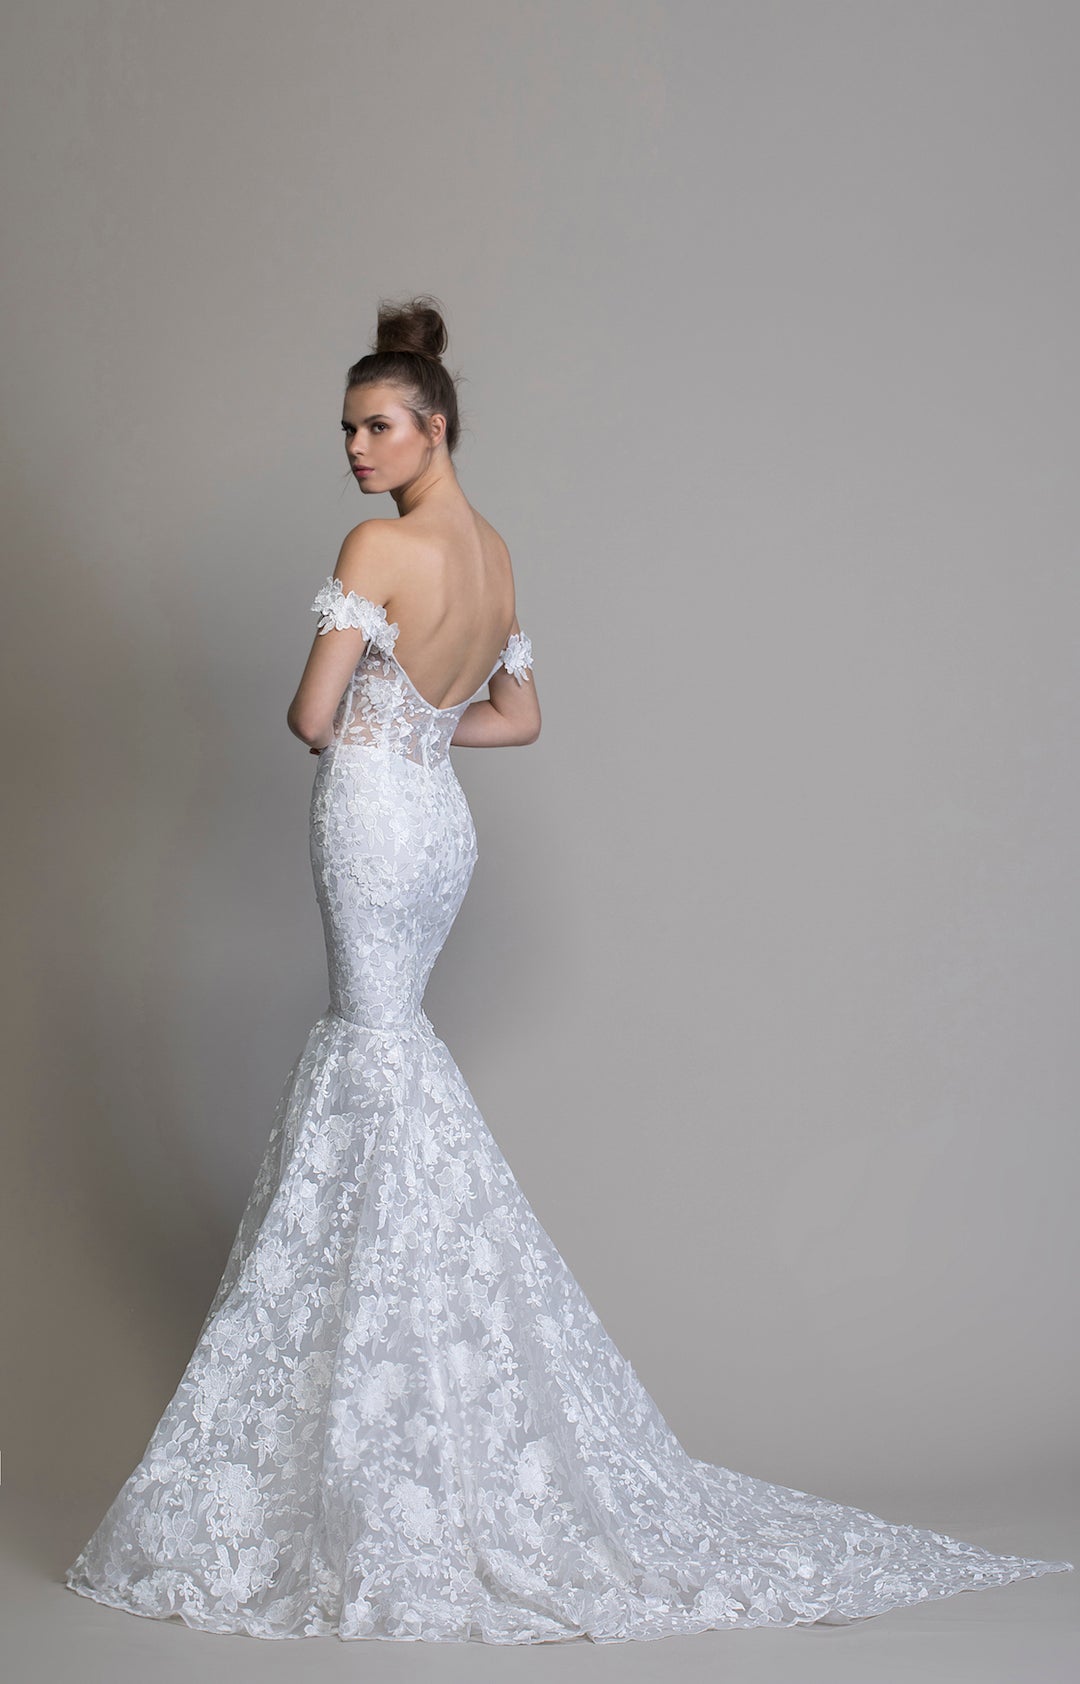 Pnina Tornai's new LOVE 2020 Collection is out! This is style 14771